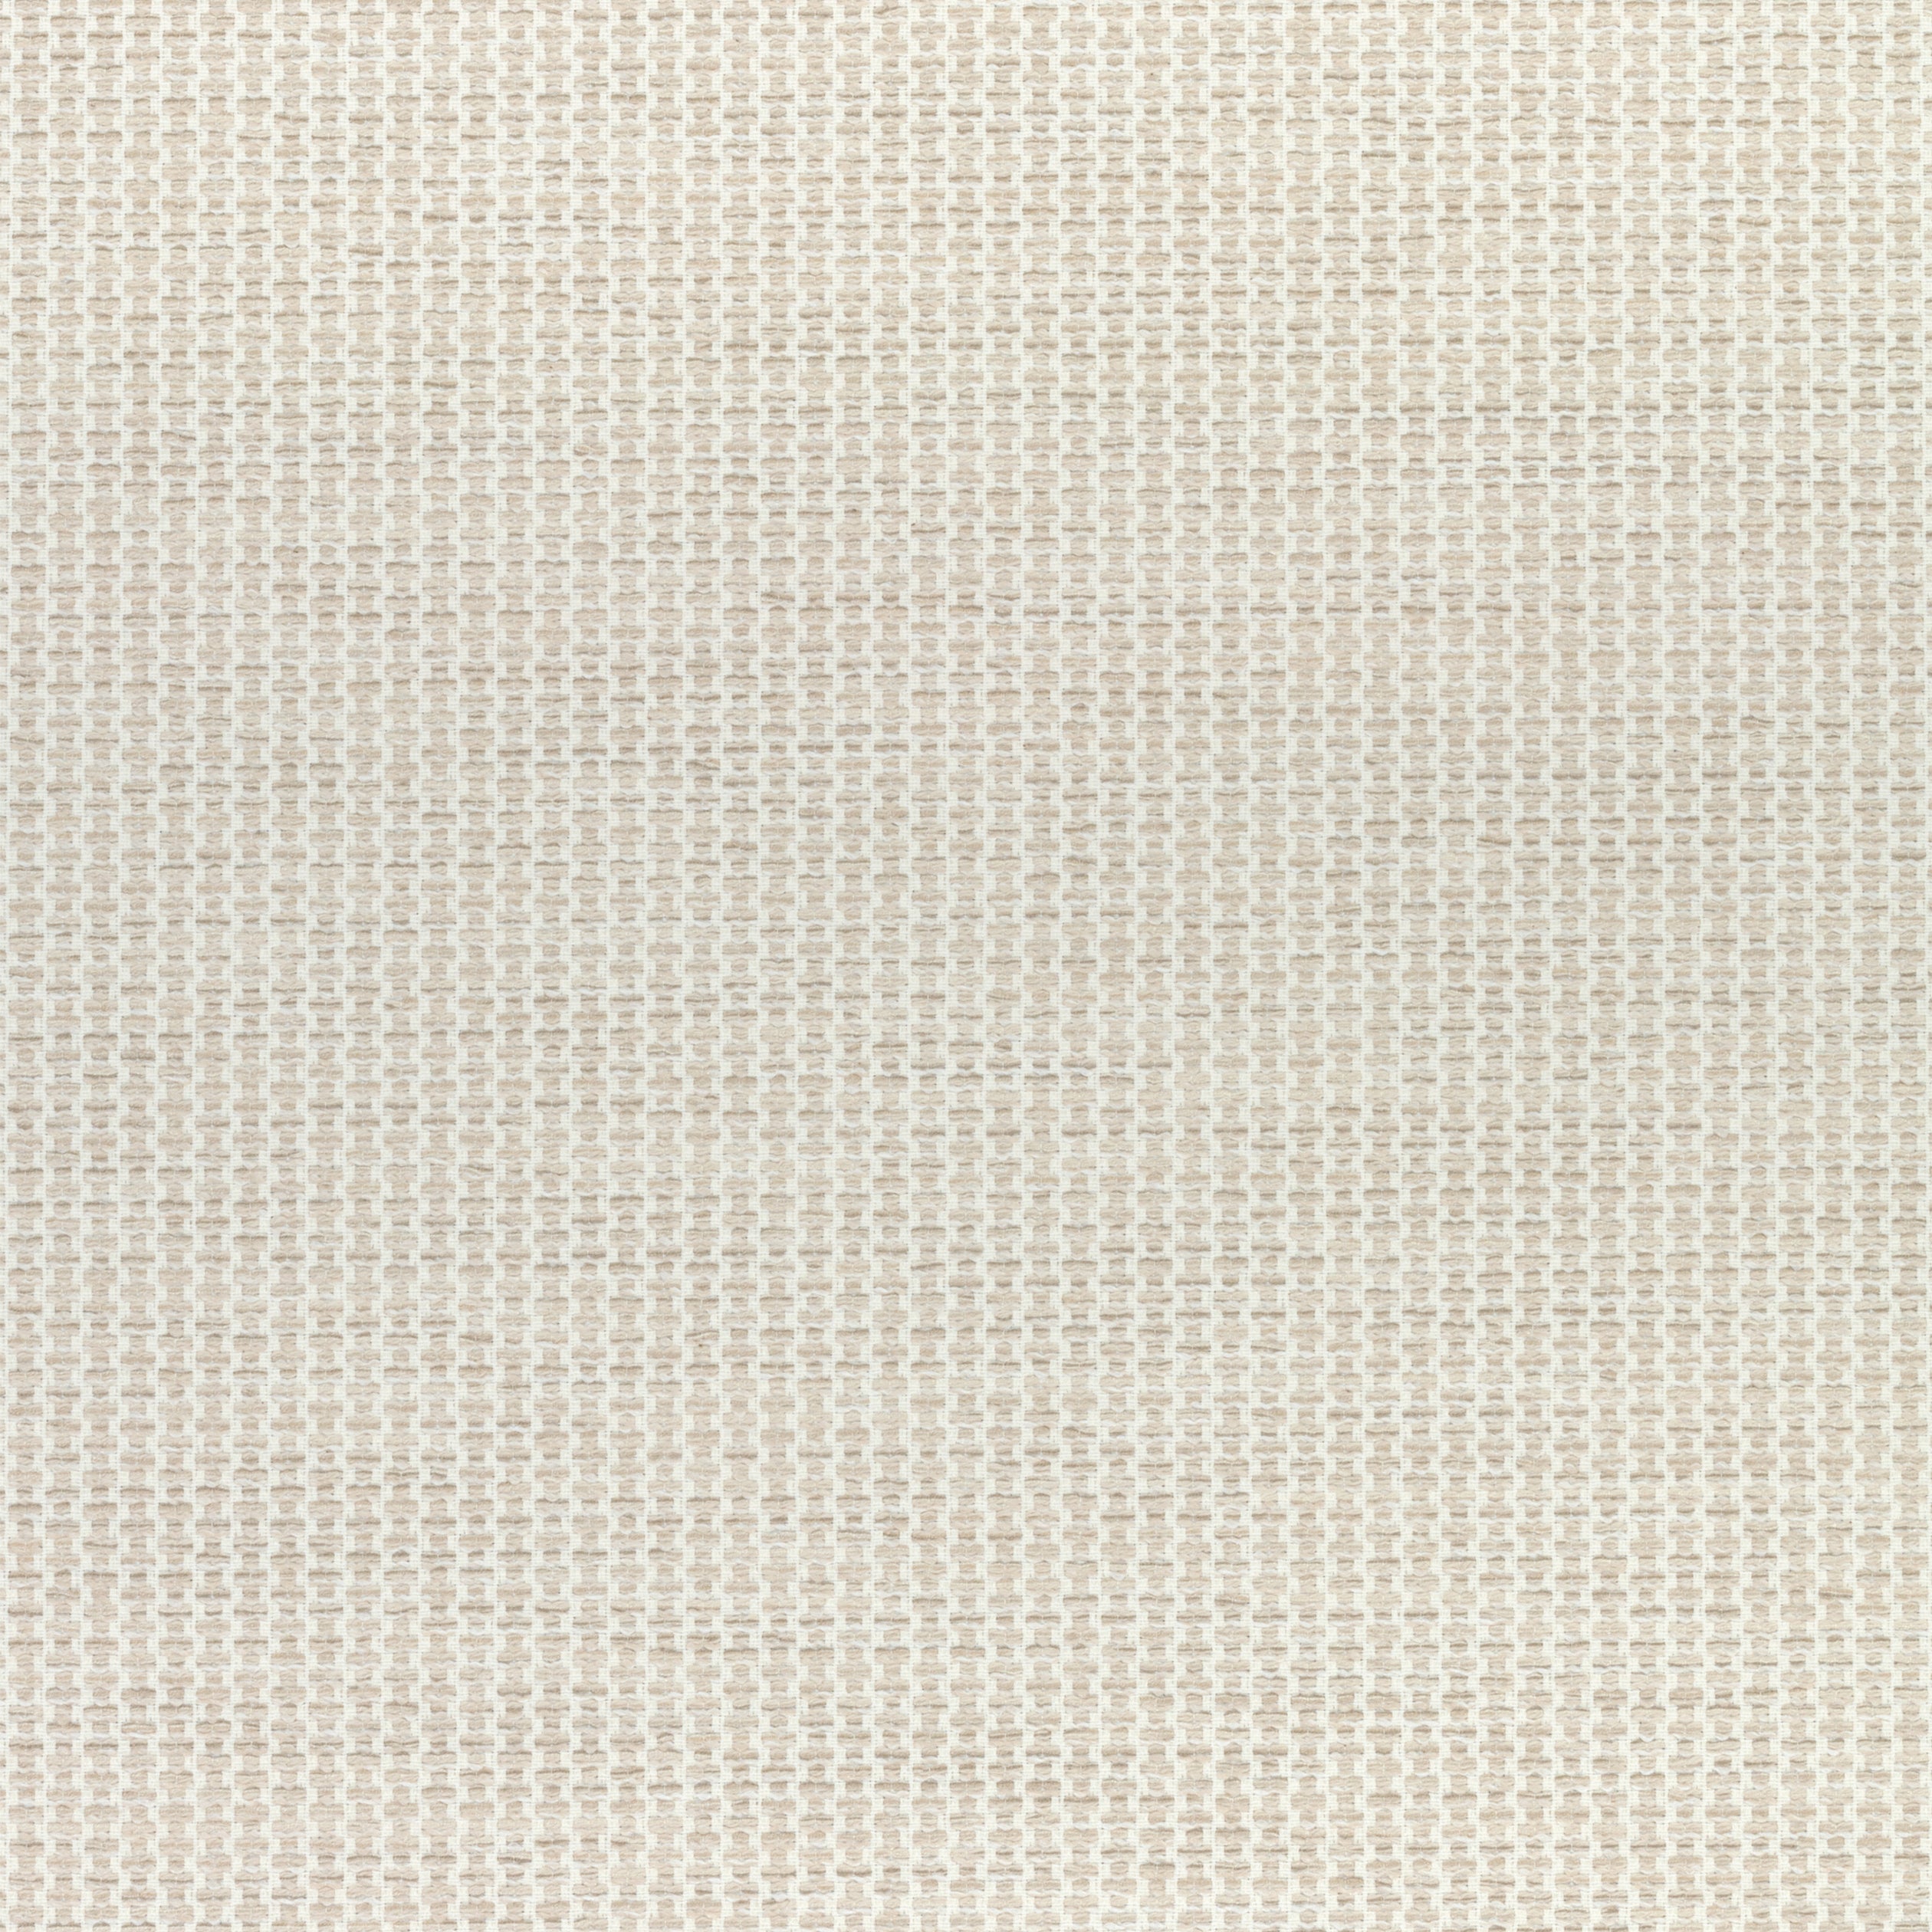 Ryder fabric in flax color - pattern number W74083 - by Thibaut in the Cadence collection